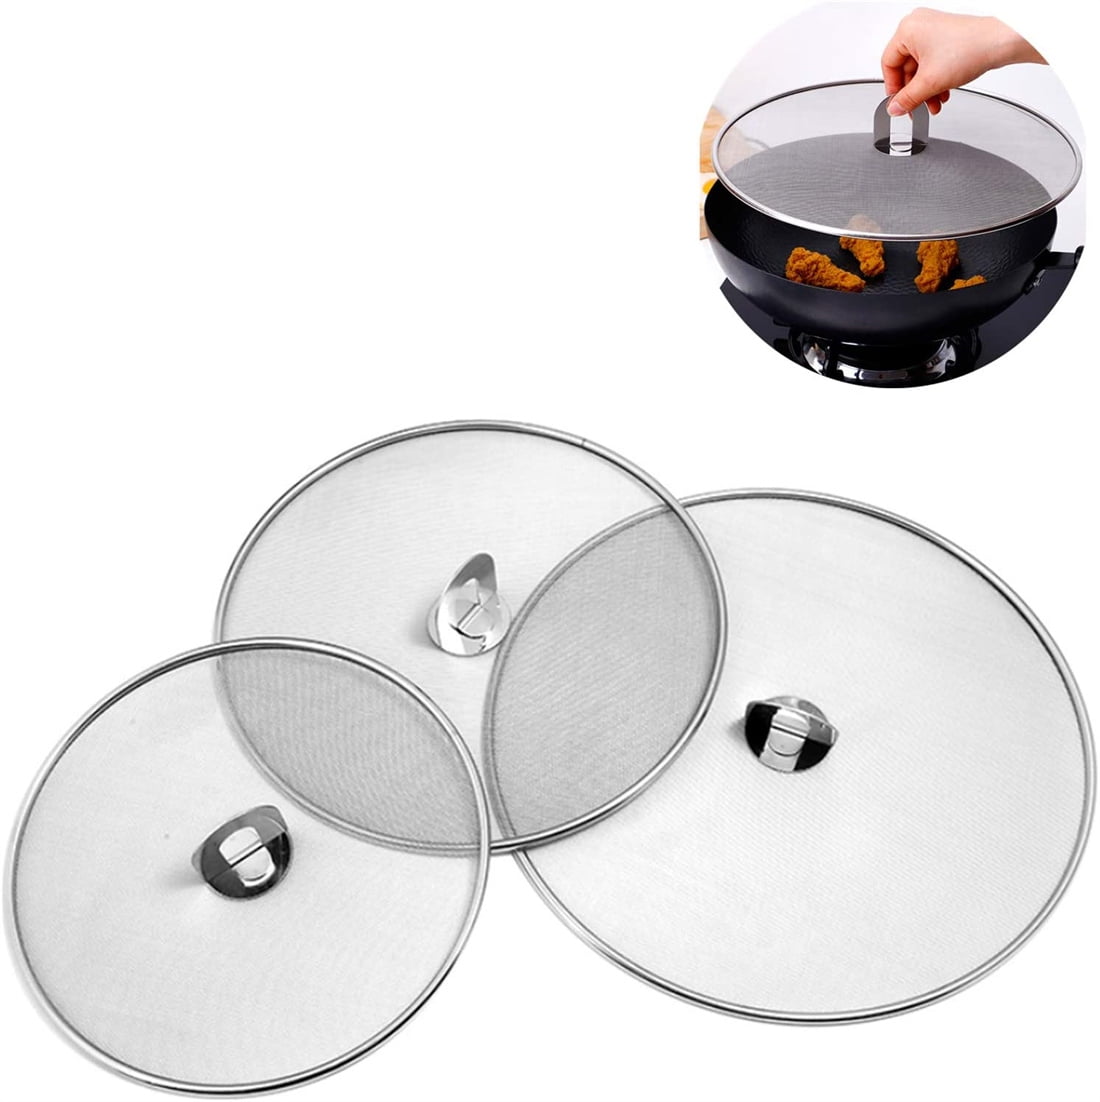 Calphalon Splatter Guard Fits 8, 10, 12 Inch Skillets Fry Pans  Cooking  and Creating Stove Top Safety Gadget Tool 13 Overall Diam EUC 